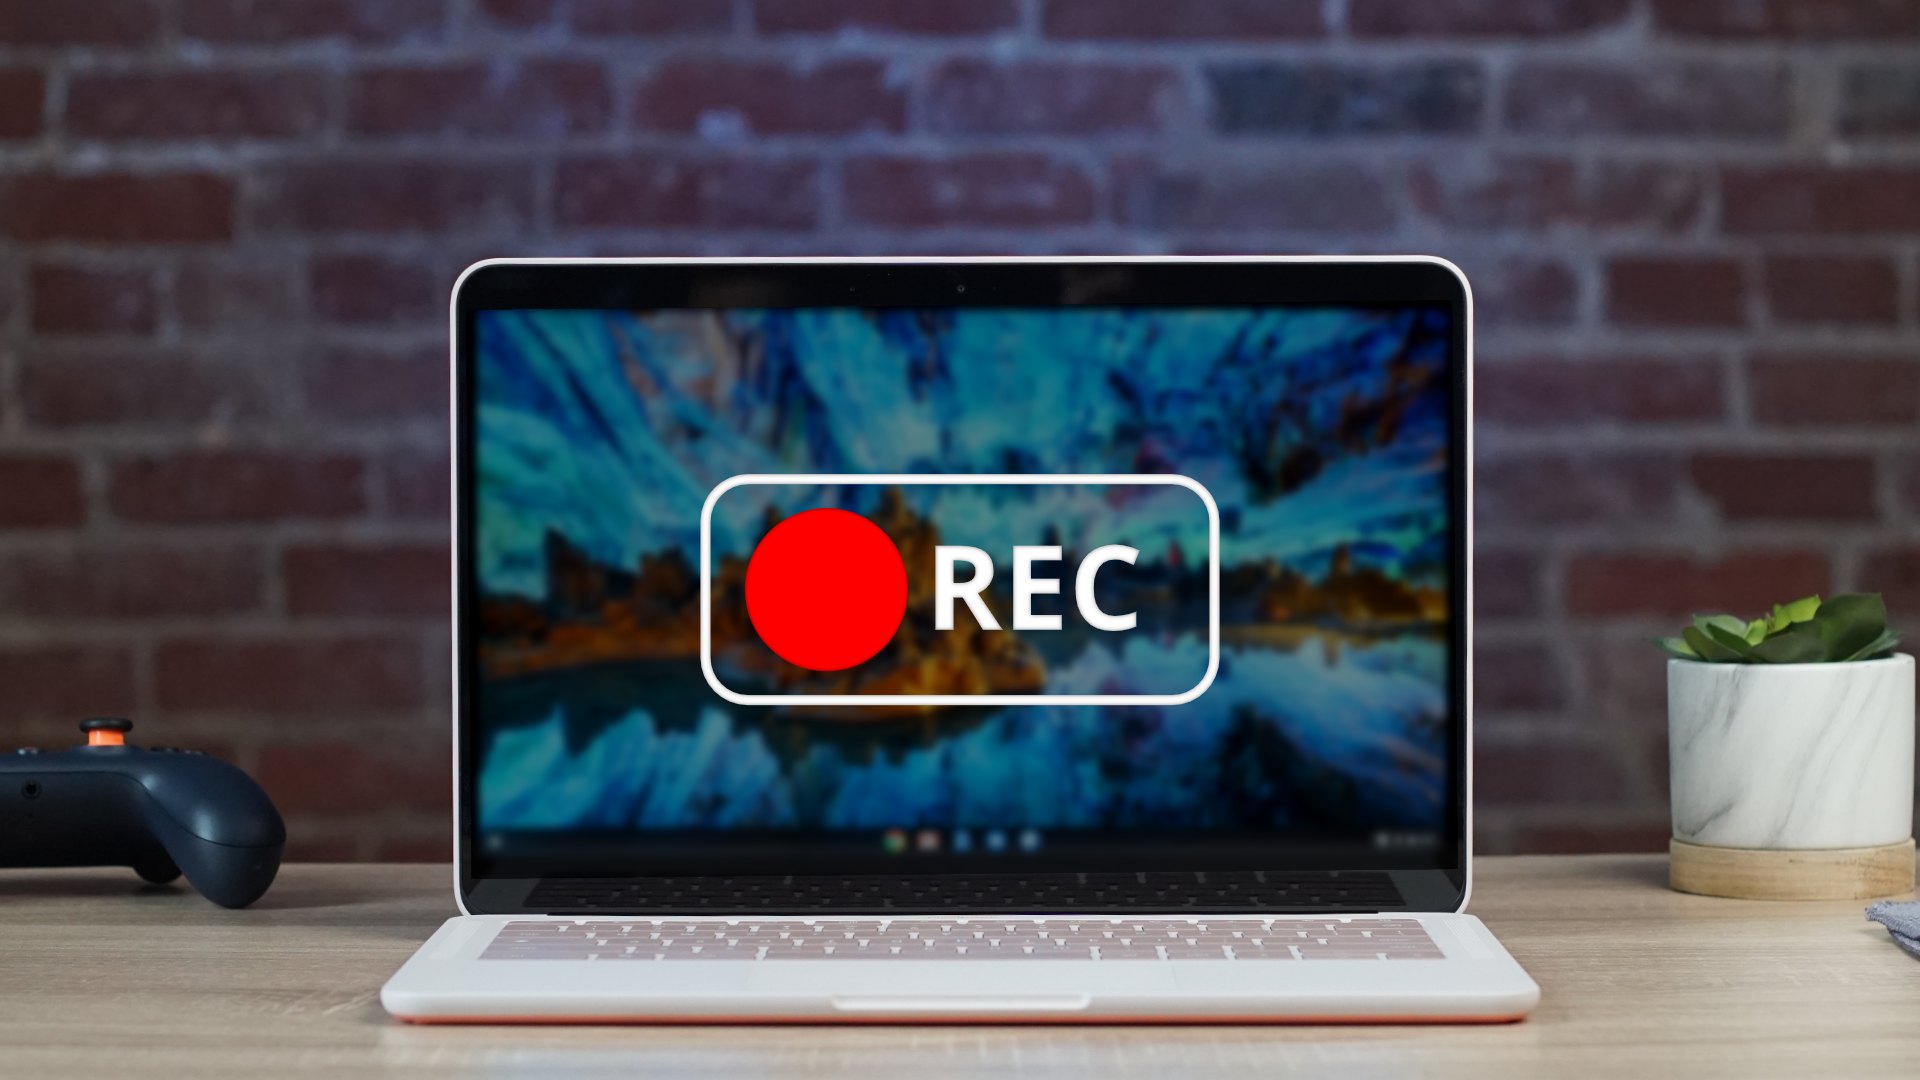 How to screen record using a Chromebook